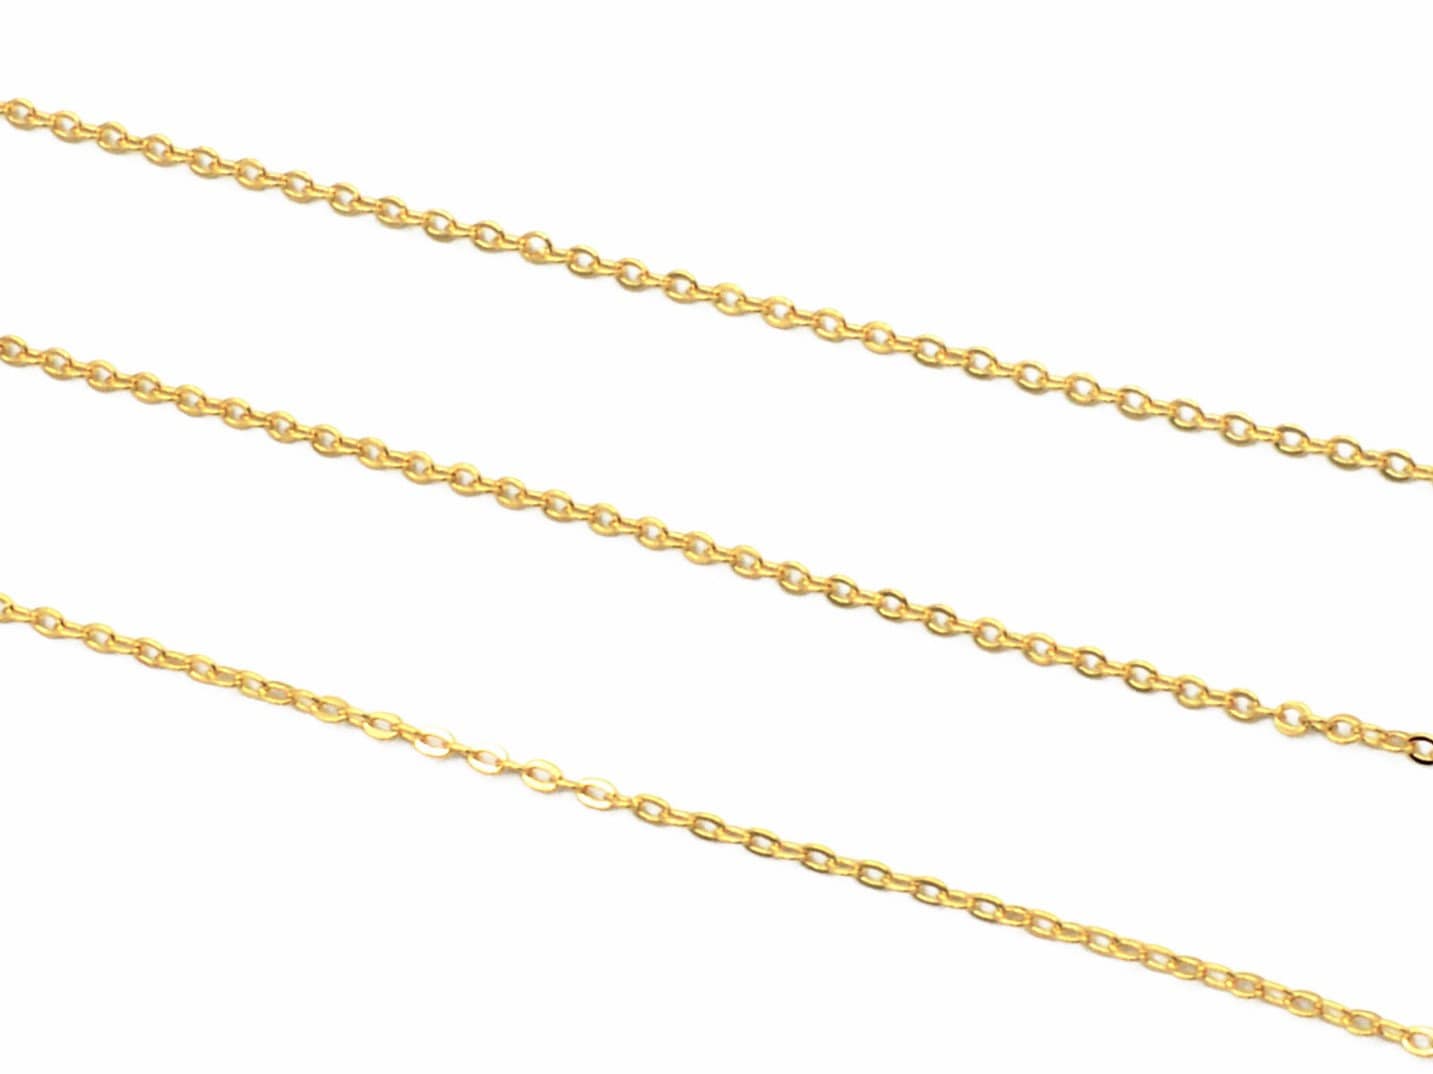 Adjustable Cable Flat Link Diamond Cut Chain 14K Gold Filled with 2 inch extension Chain 16/18/20/22 Inch Necklace gift for everyone - BeadsFindingDepot